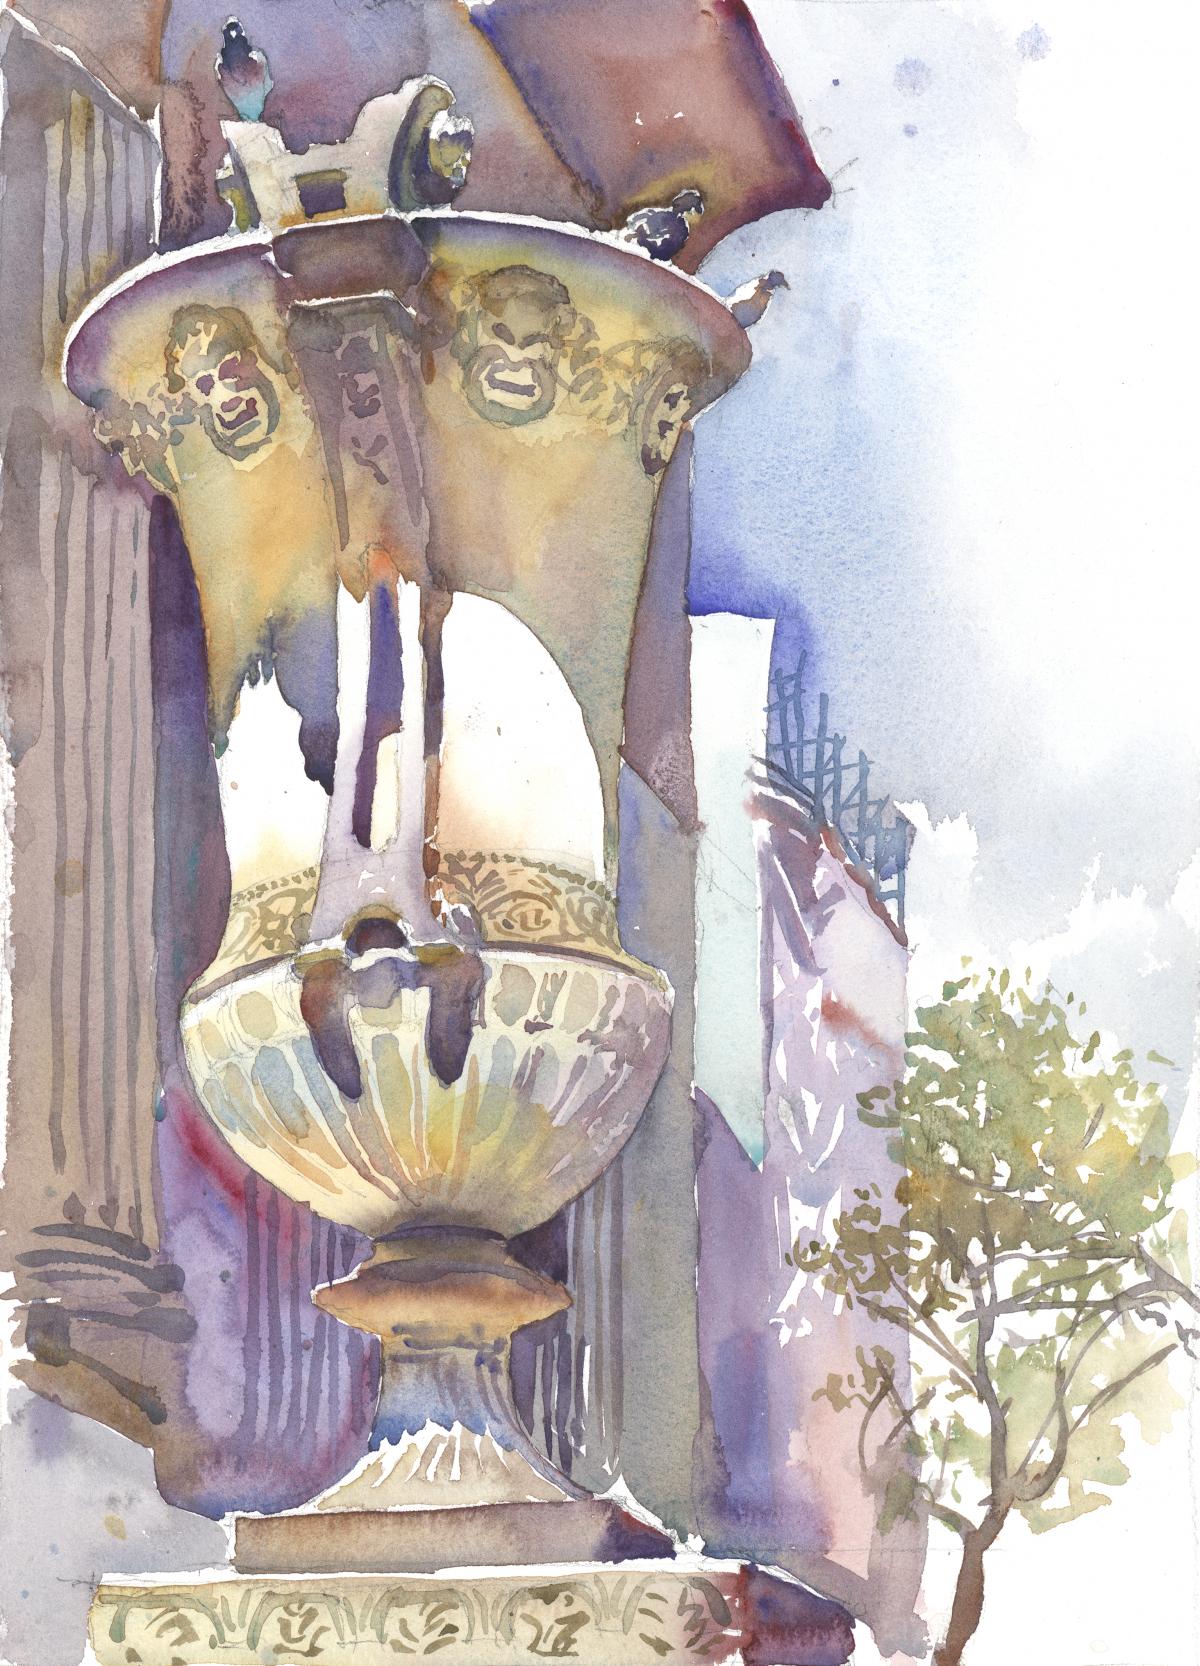 Library's Urn - en plein air watercolor painting of sculpture by Frank Costantino